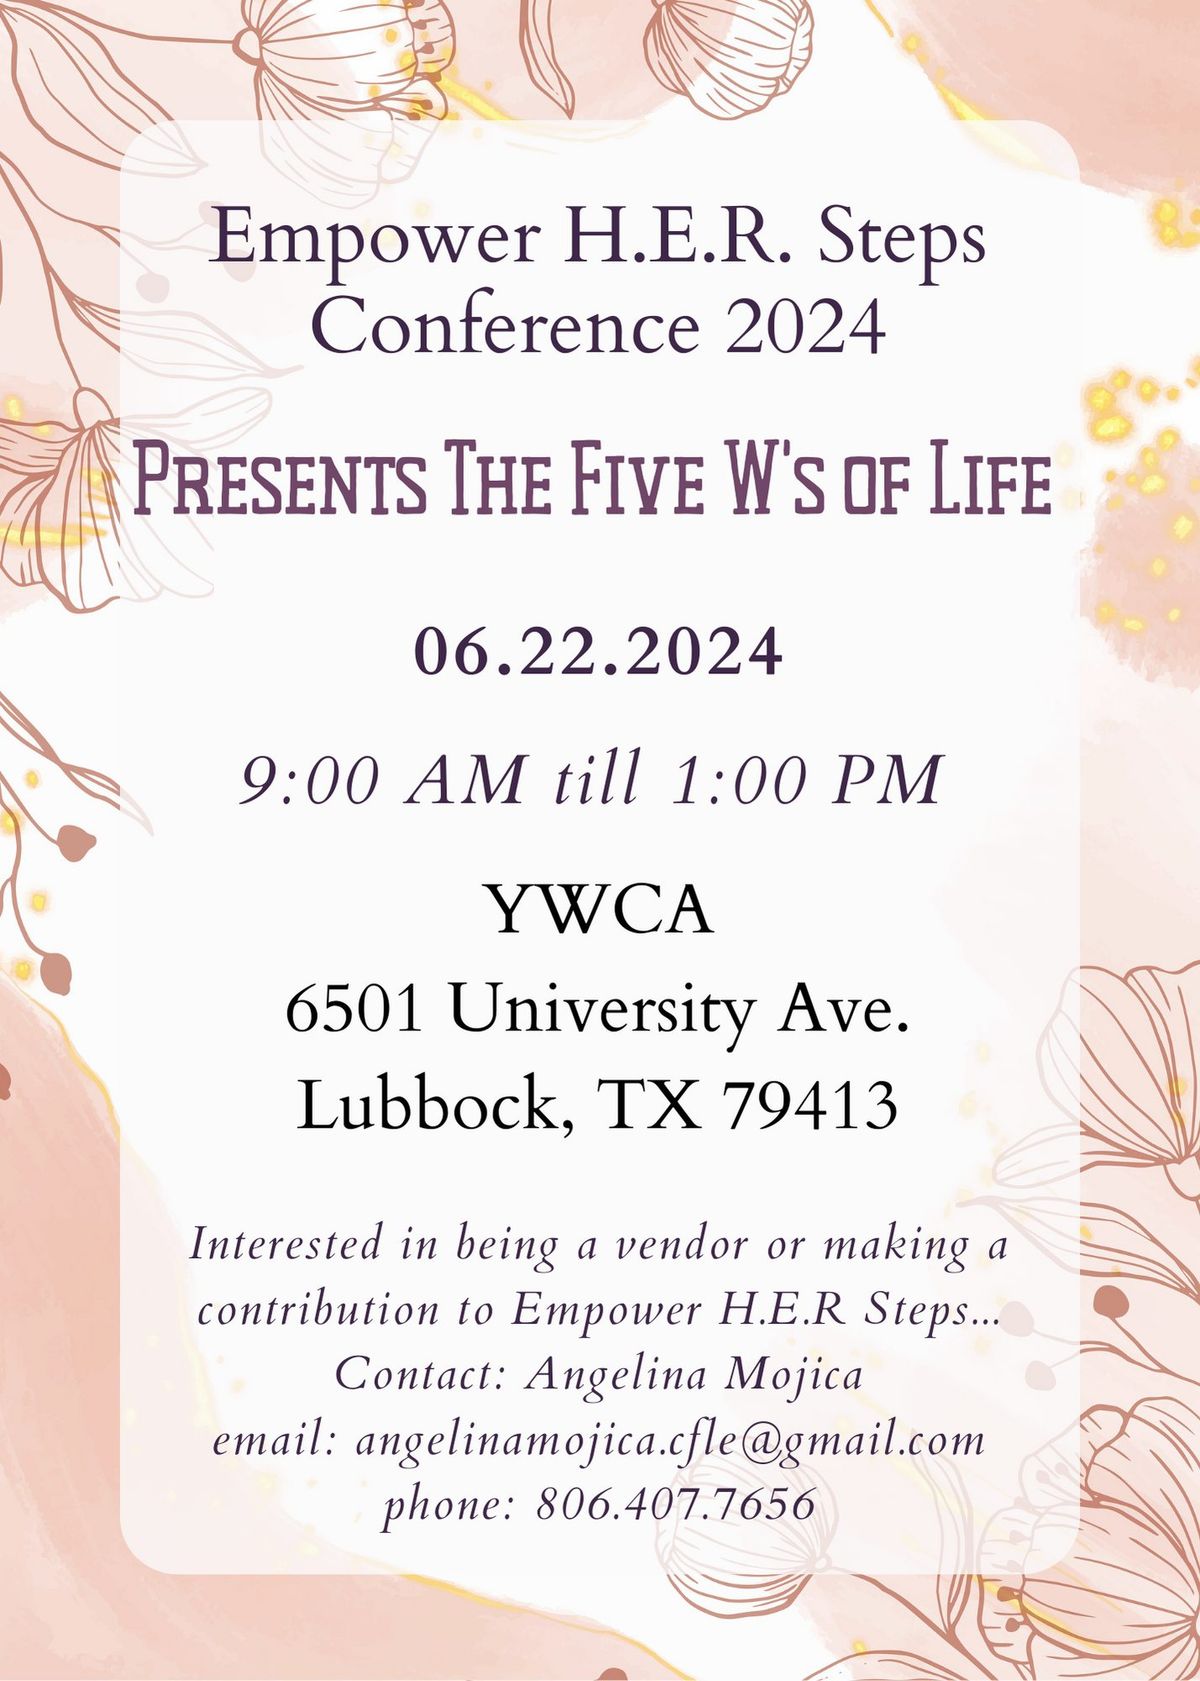 Empower HER Steps Presents The 5 W's of Life 